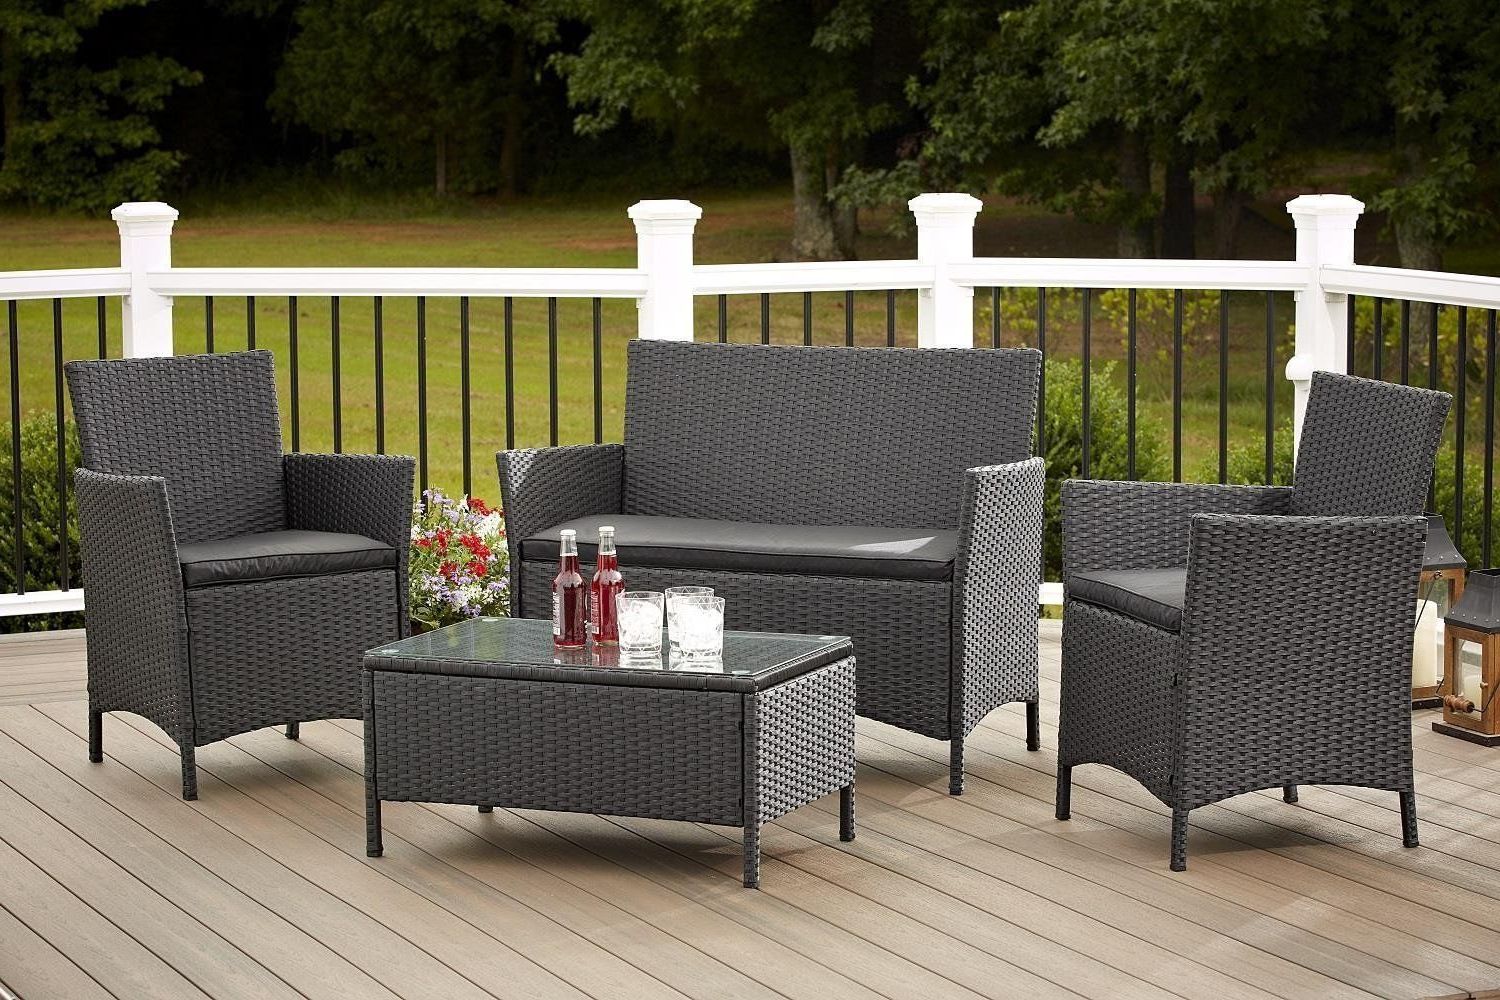 Trendy Jamaica 4 Piece Patio Furniture Set In Outdoor Resin Wicker With Black Pertaining To 4 Piece Outdoor Patio Sets (View 6 of 15)